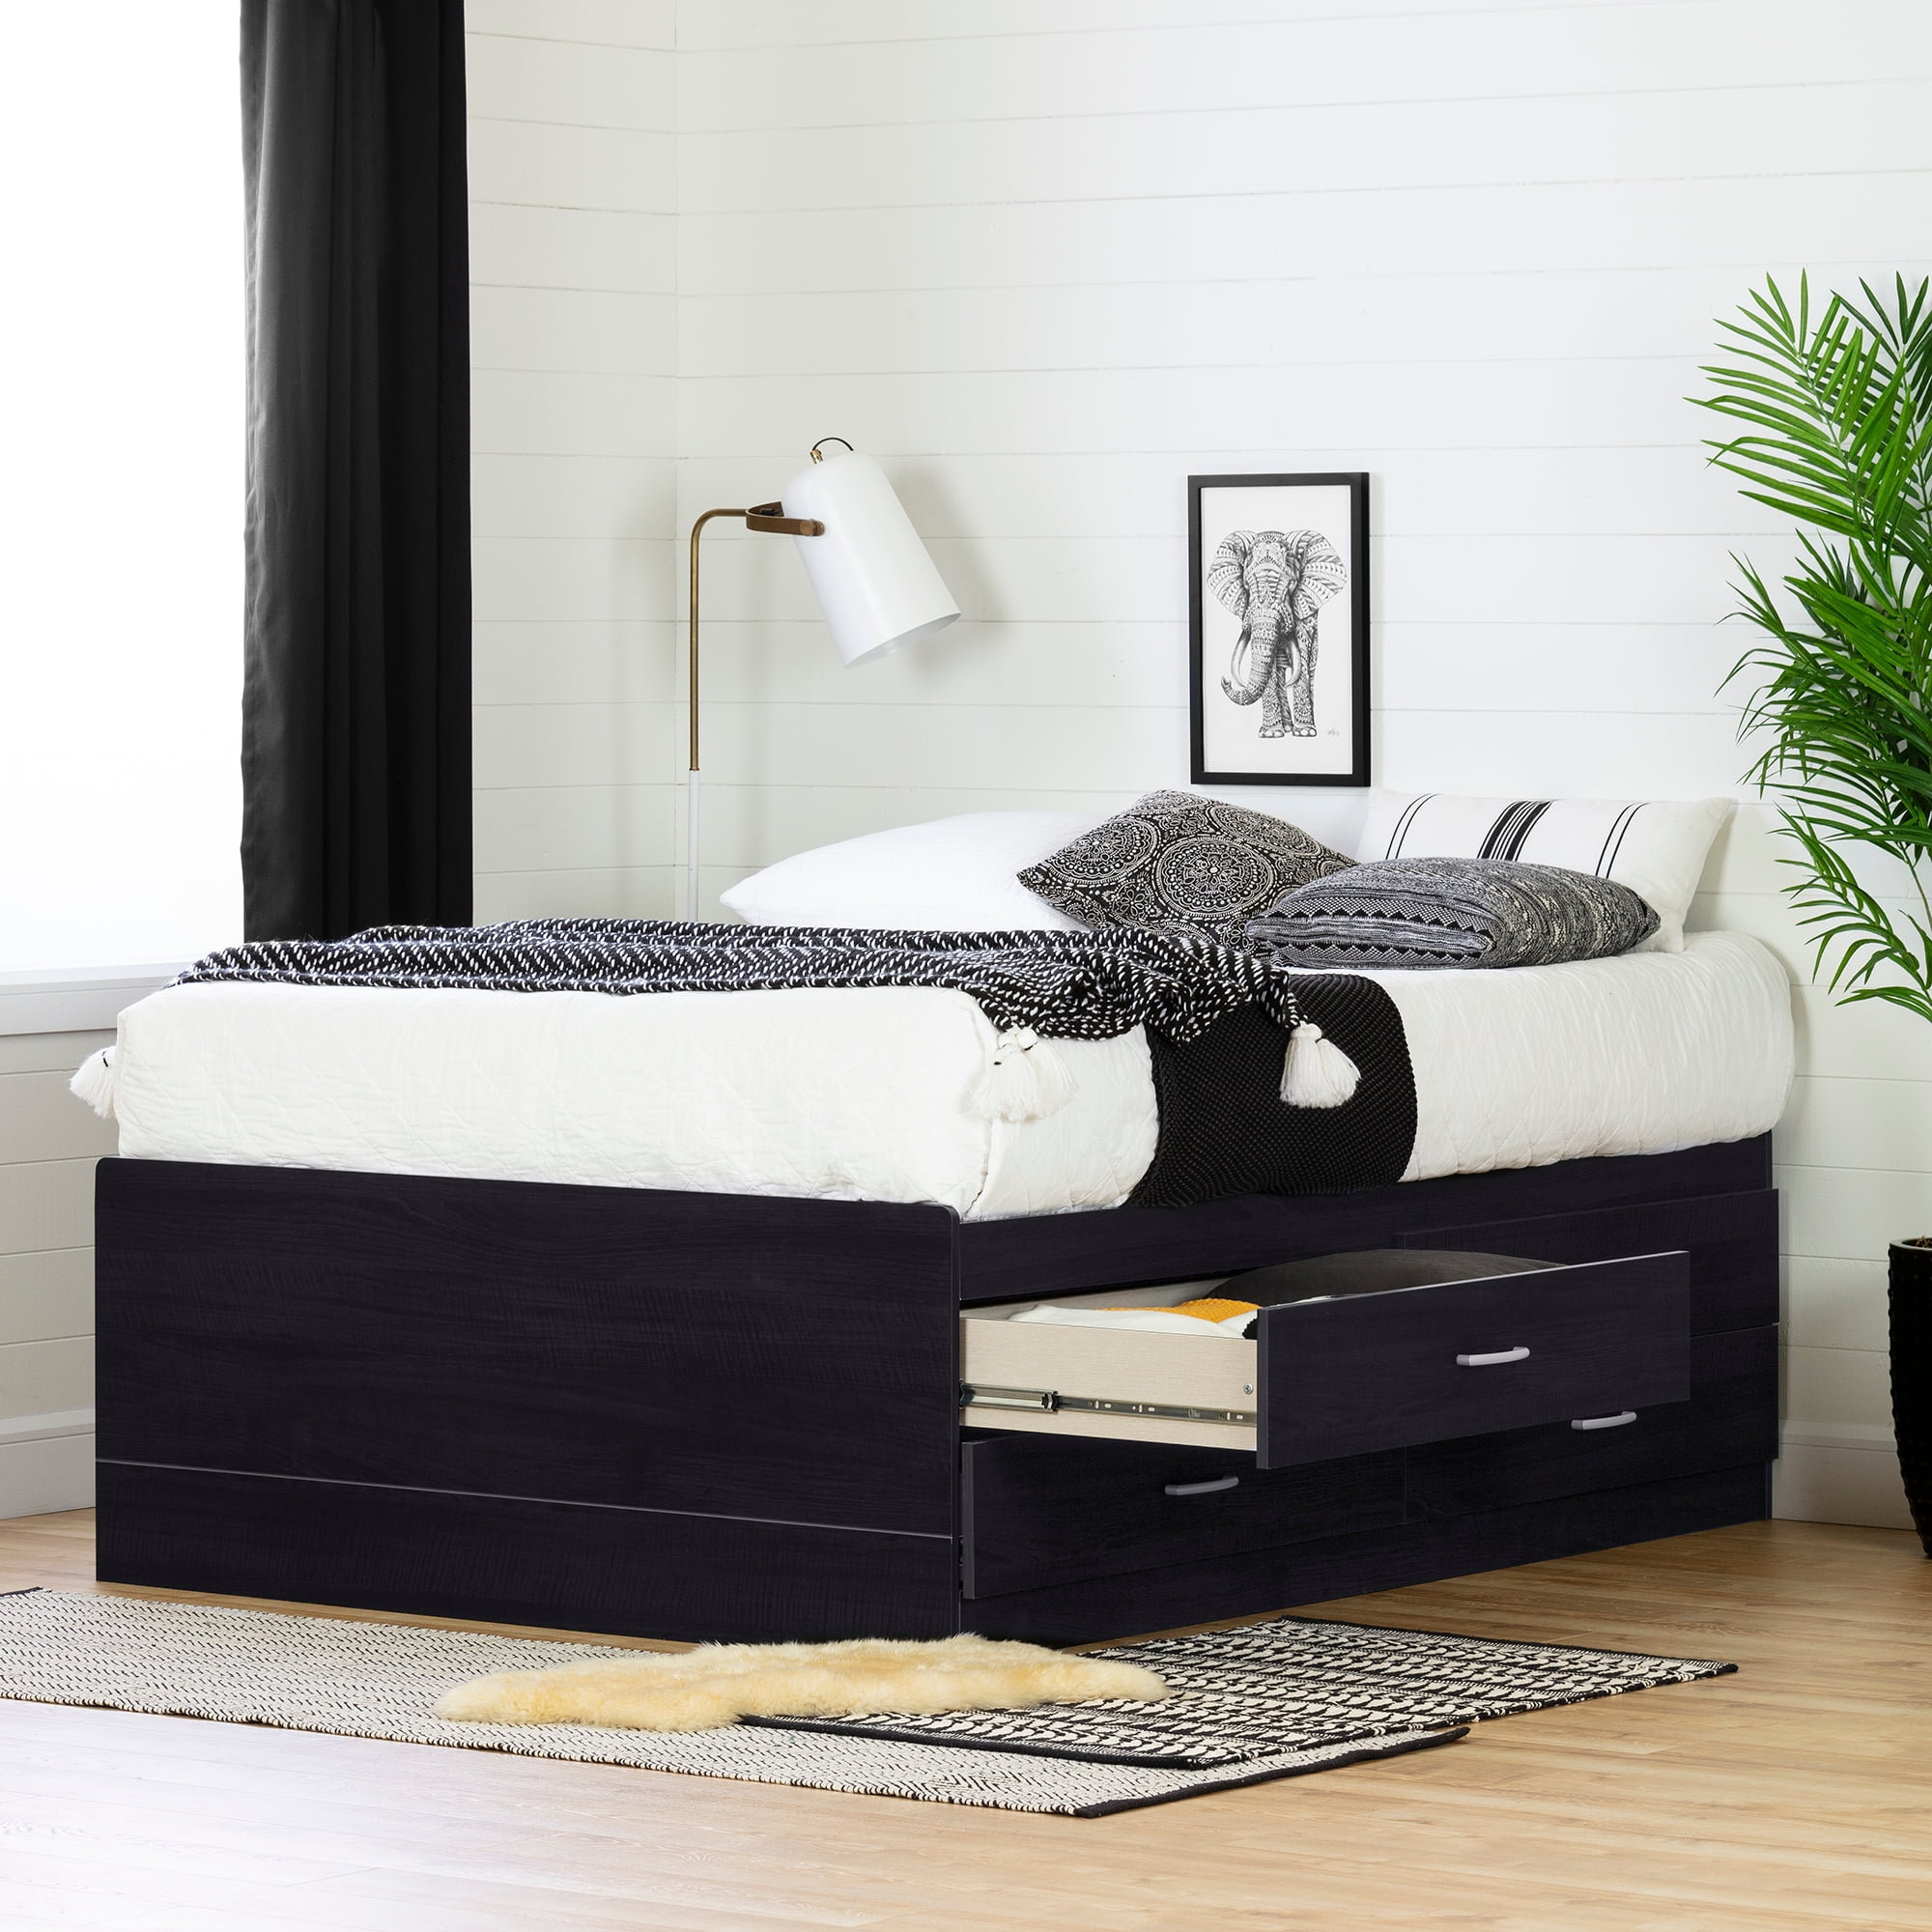 South S Cosmos Captain 4 Drawer, Black Tall Twin Captain S Platform Storage Bed With 6 Drawers